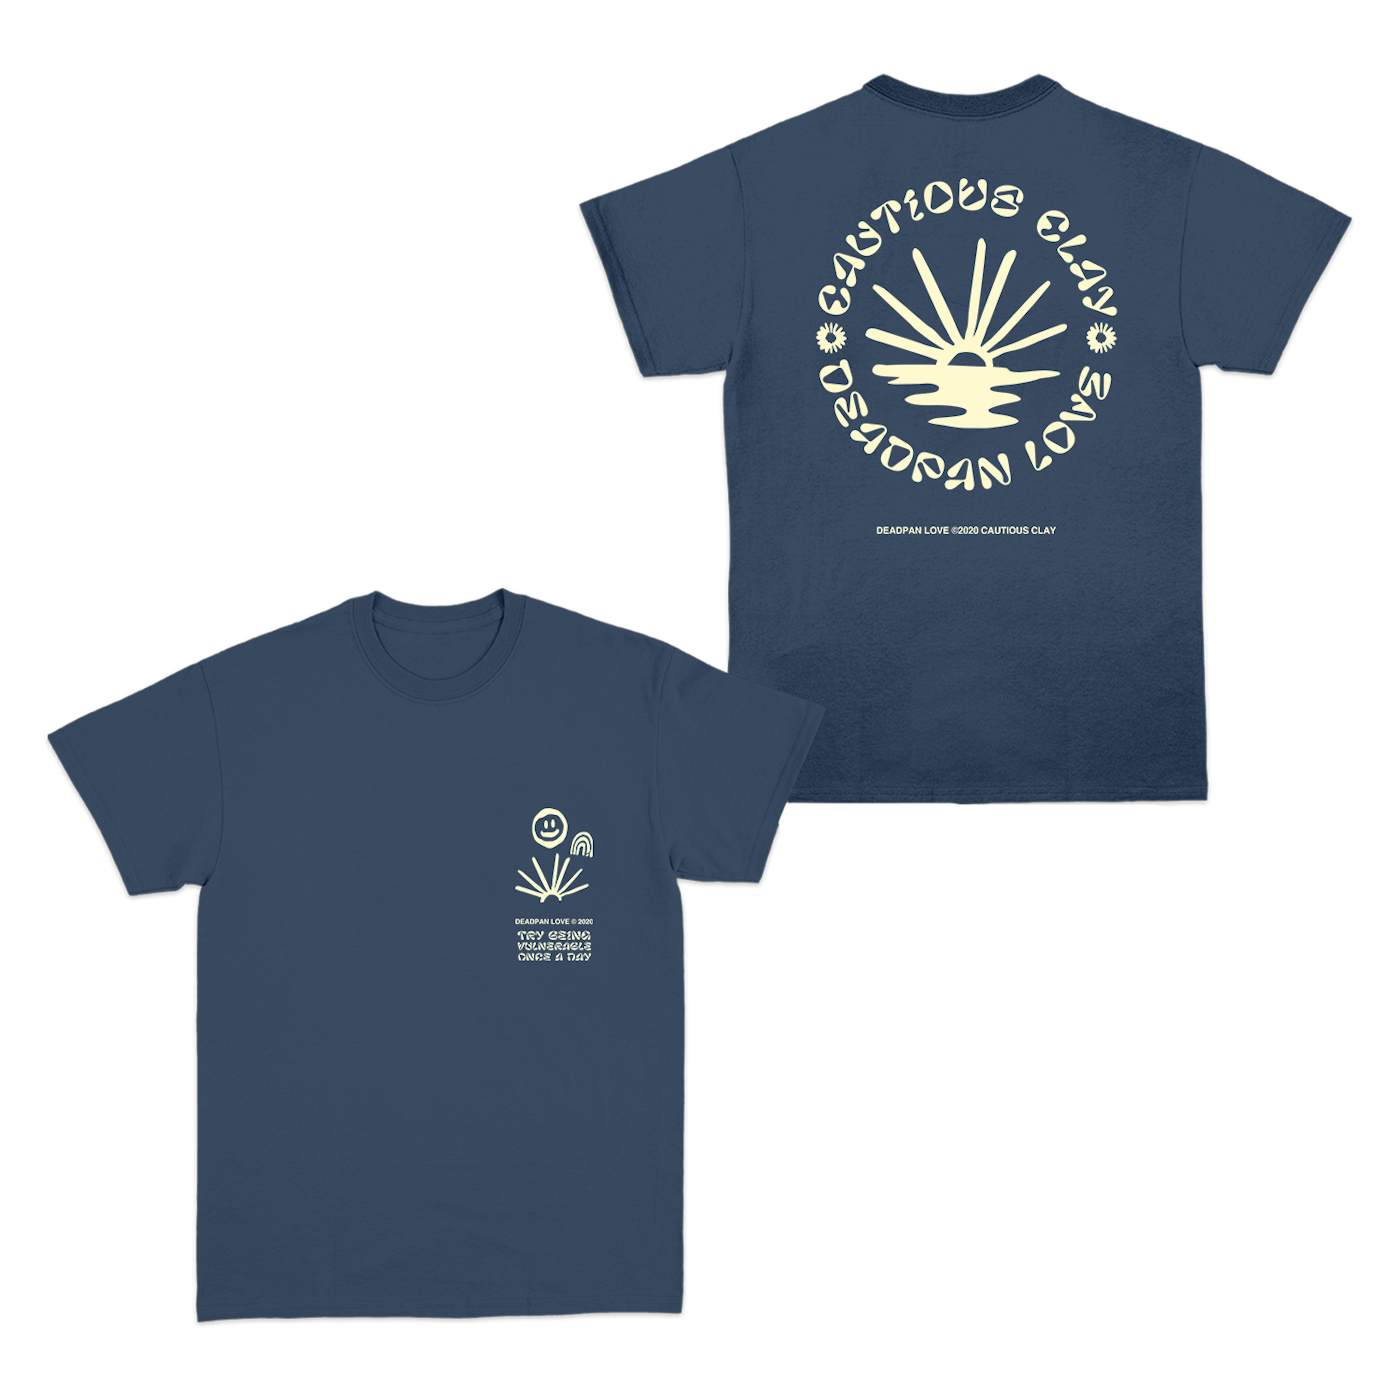 Cautious Clay Vulnerable Navy T-Shirt